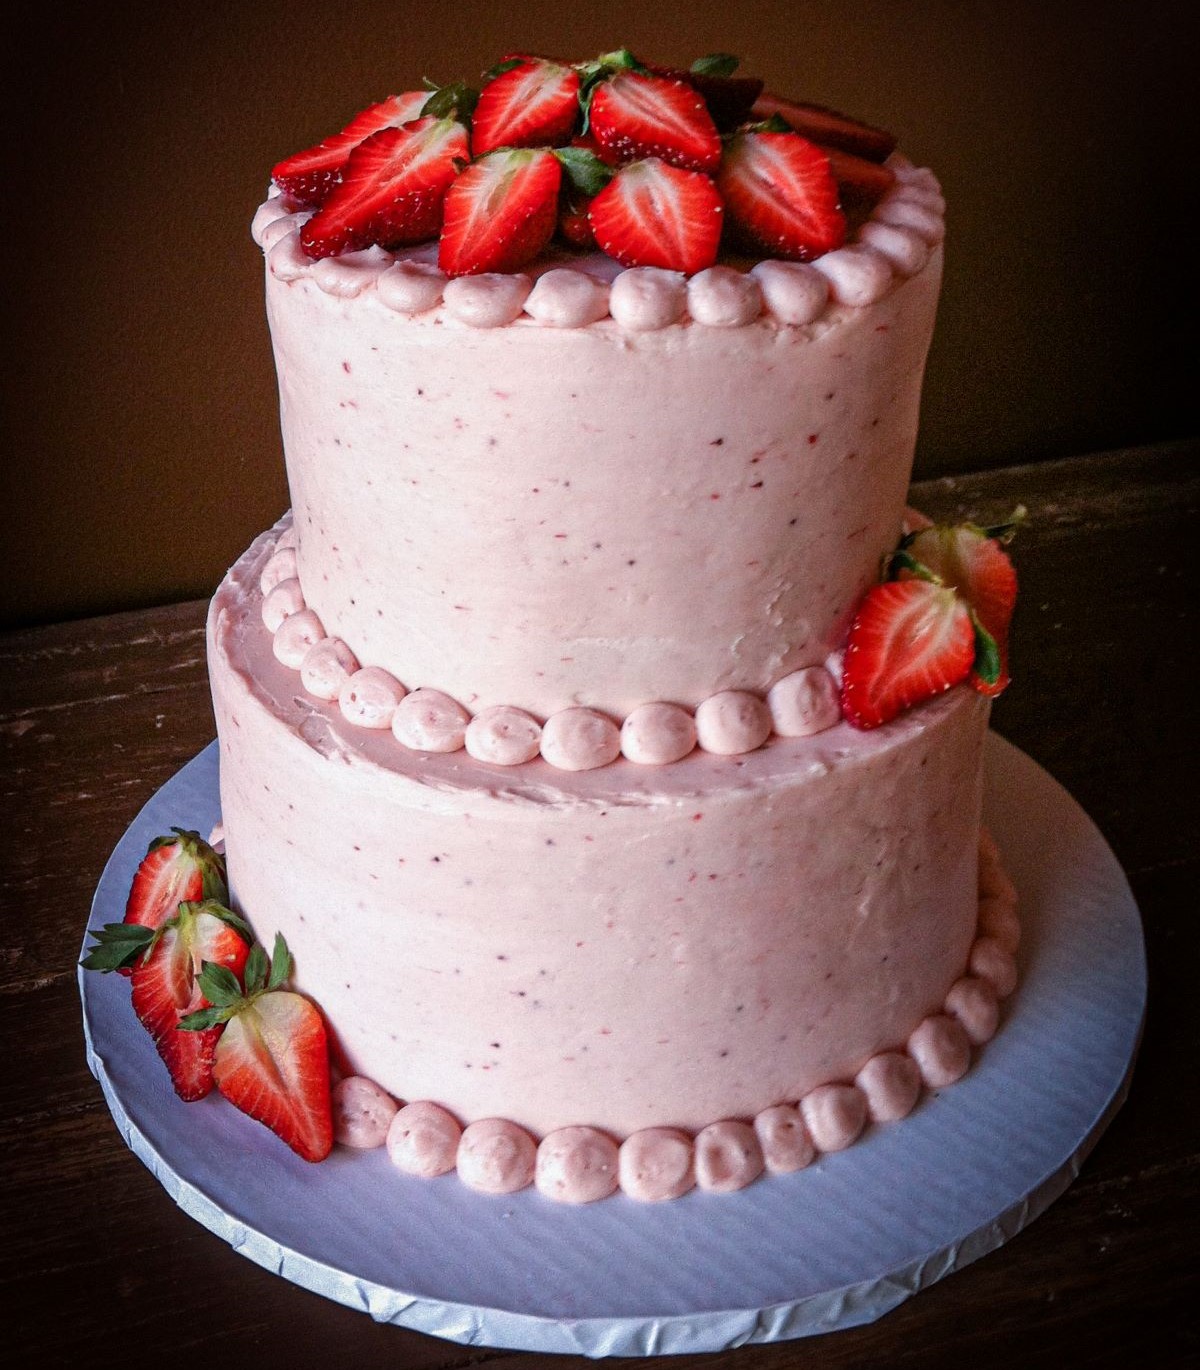 A smooth simple tiered cake with strawberry buttercream and fresh berries.